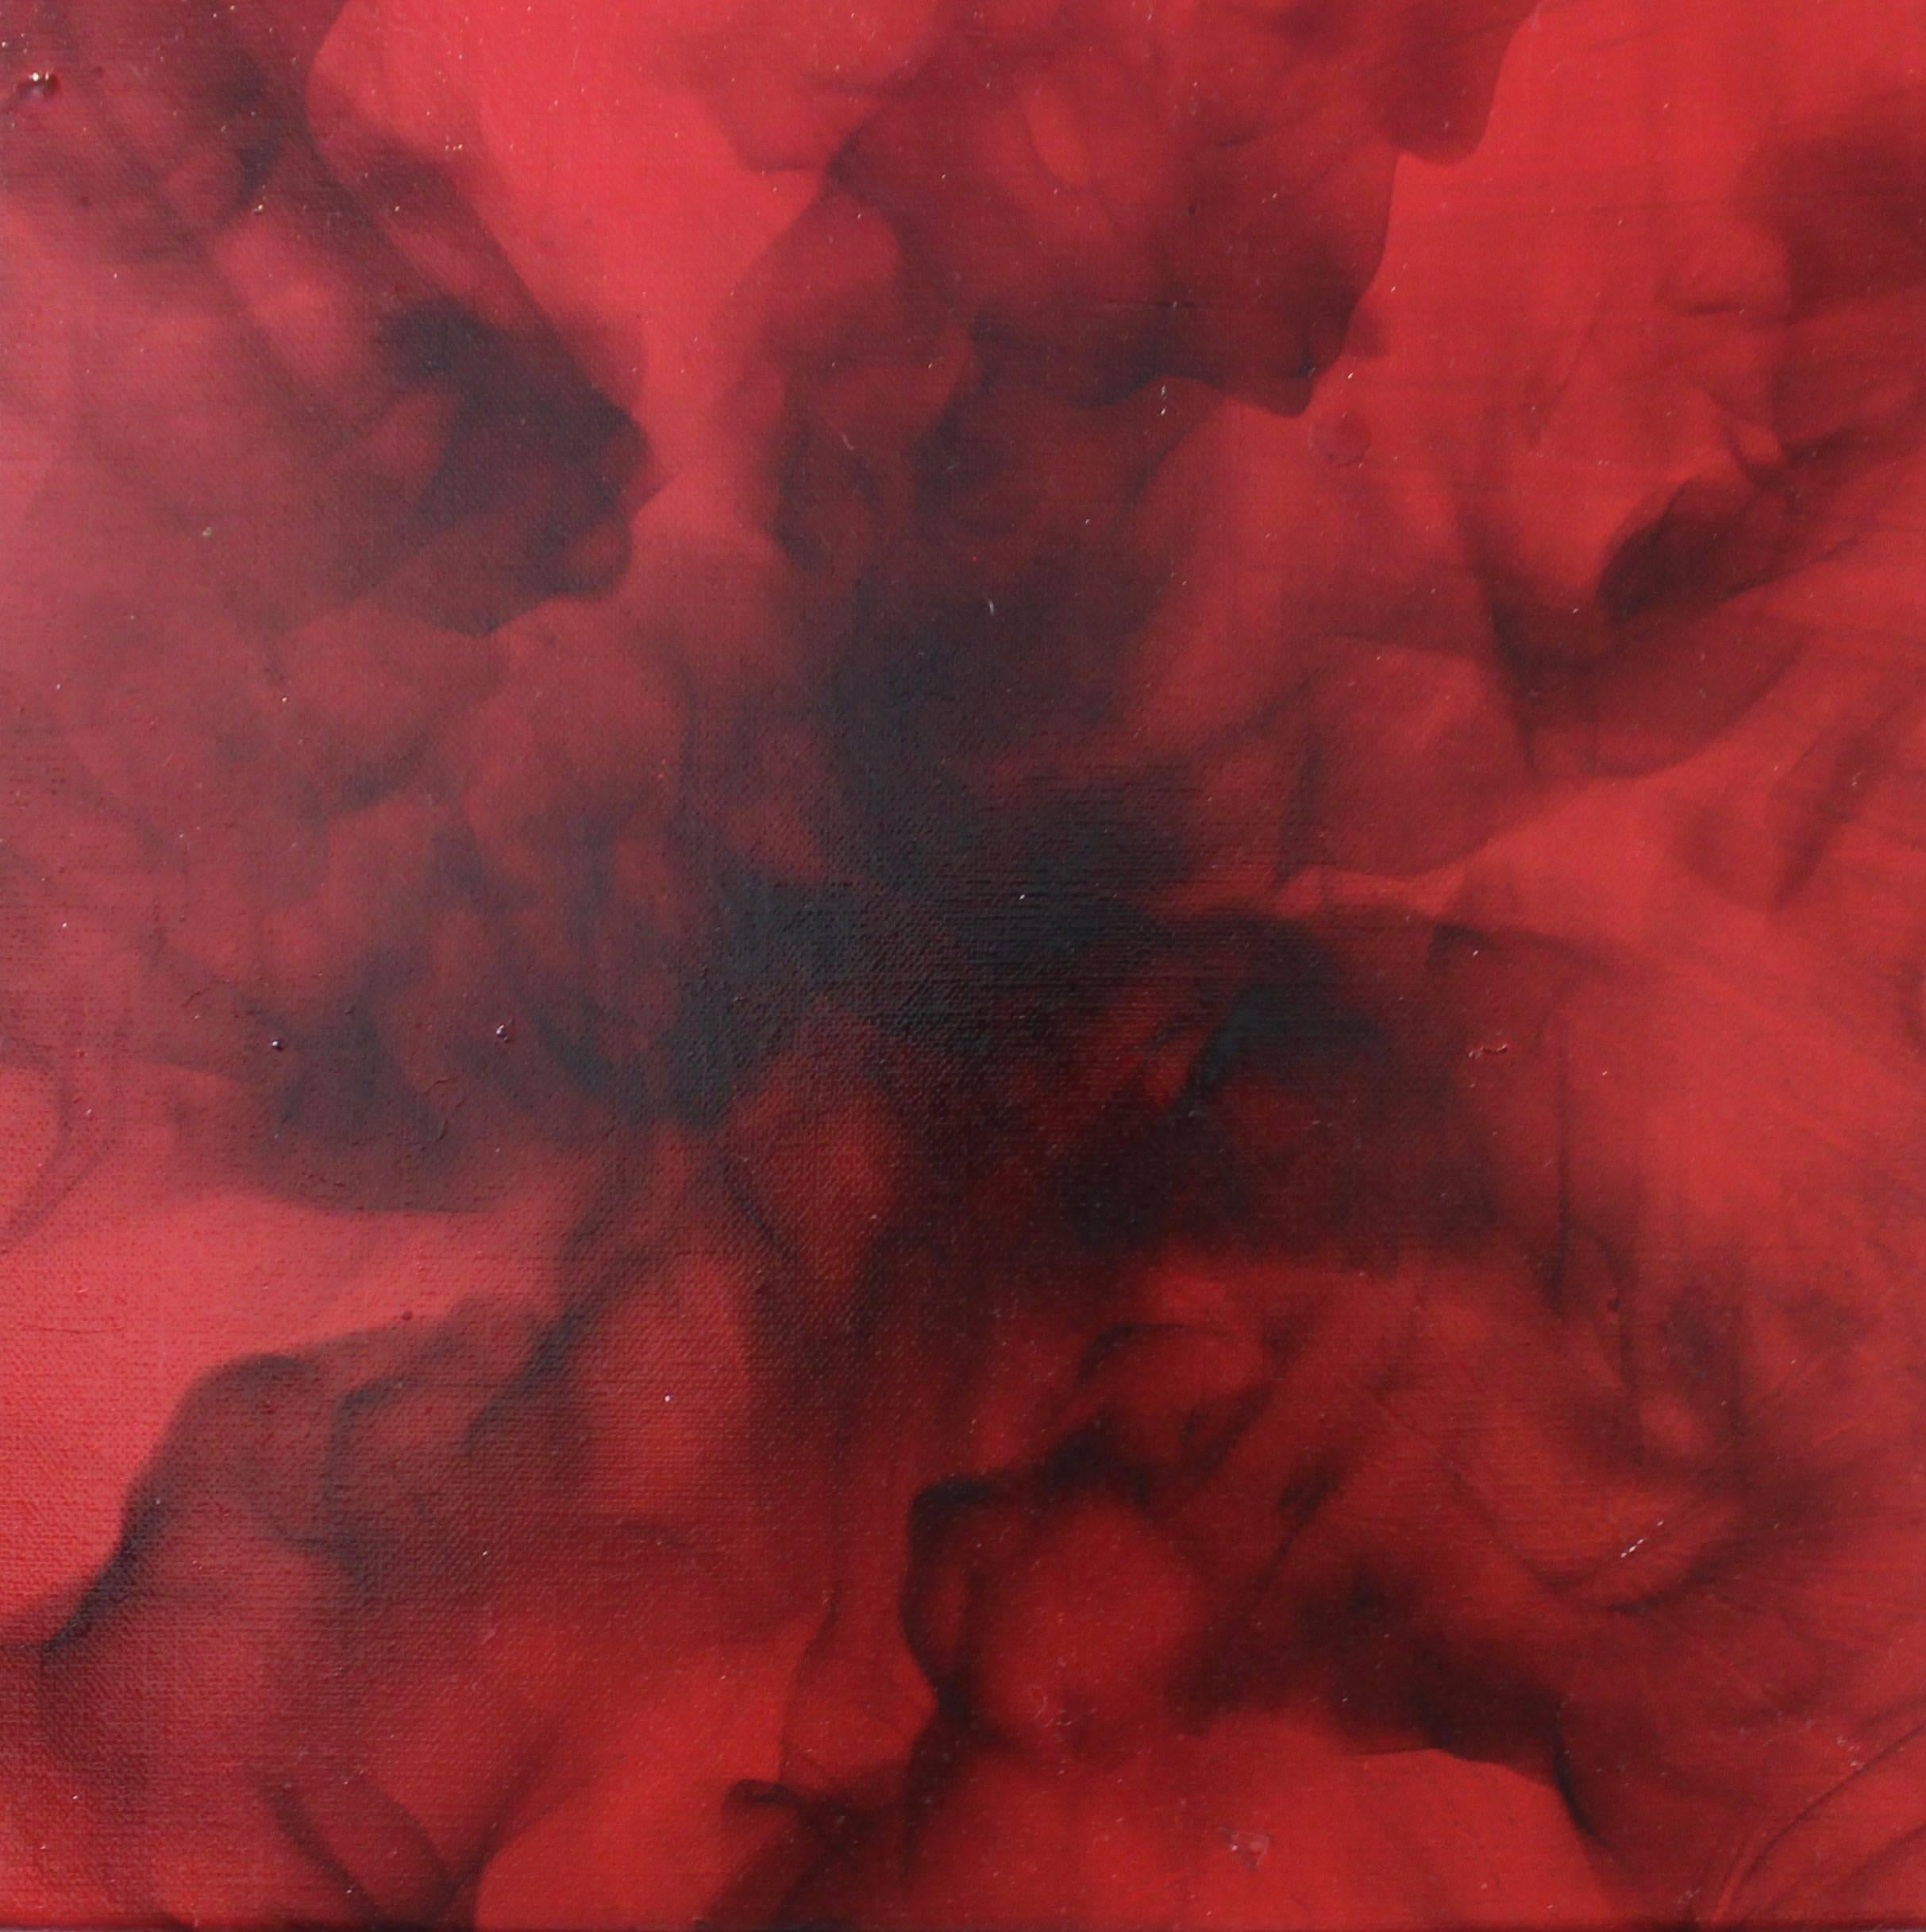 Atomic Bomb, 2017, red oil smoke painting on linen - Painting by Tara Walters